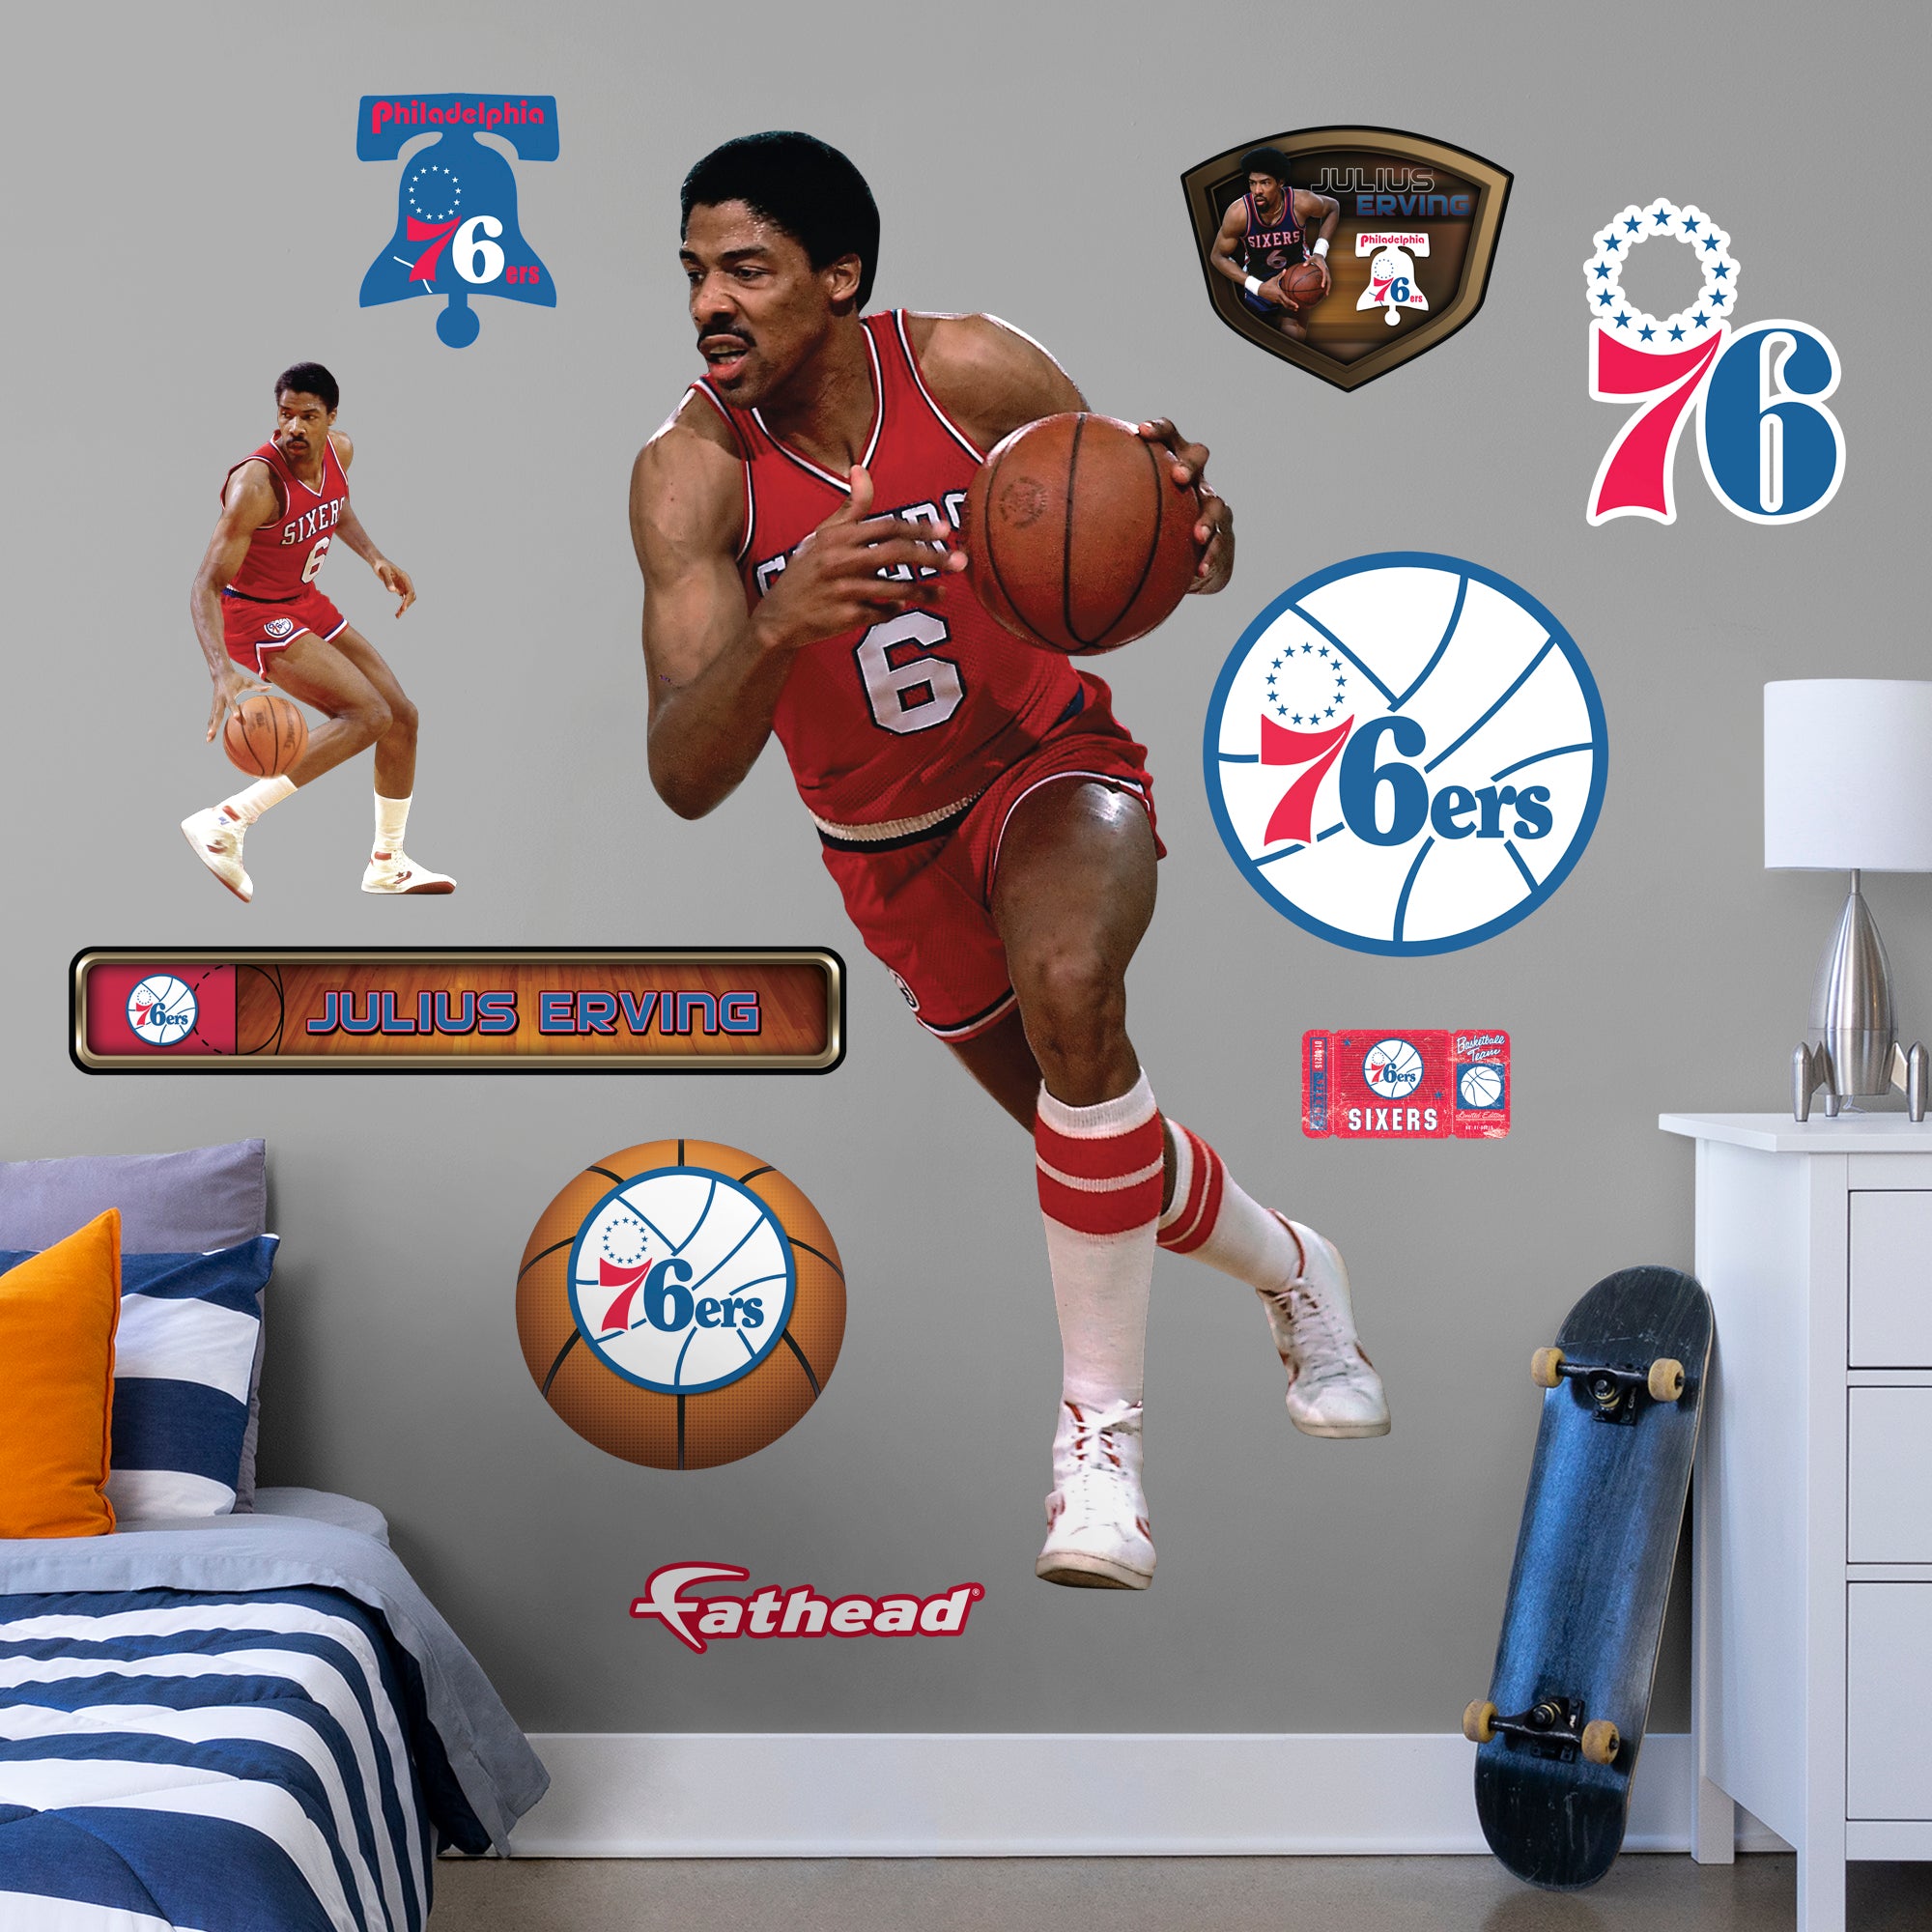 Julius Erving Legend - Officially Licensed NBA Removable Wall Decal Life-Size Athlete + 10 Decals (40"W x 76"H) by Fathead | Vin